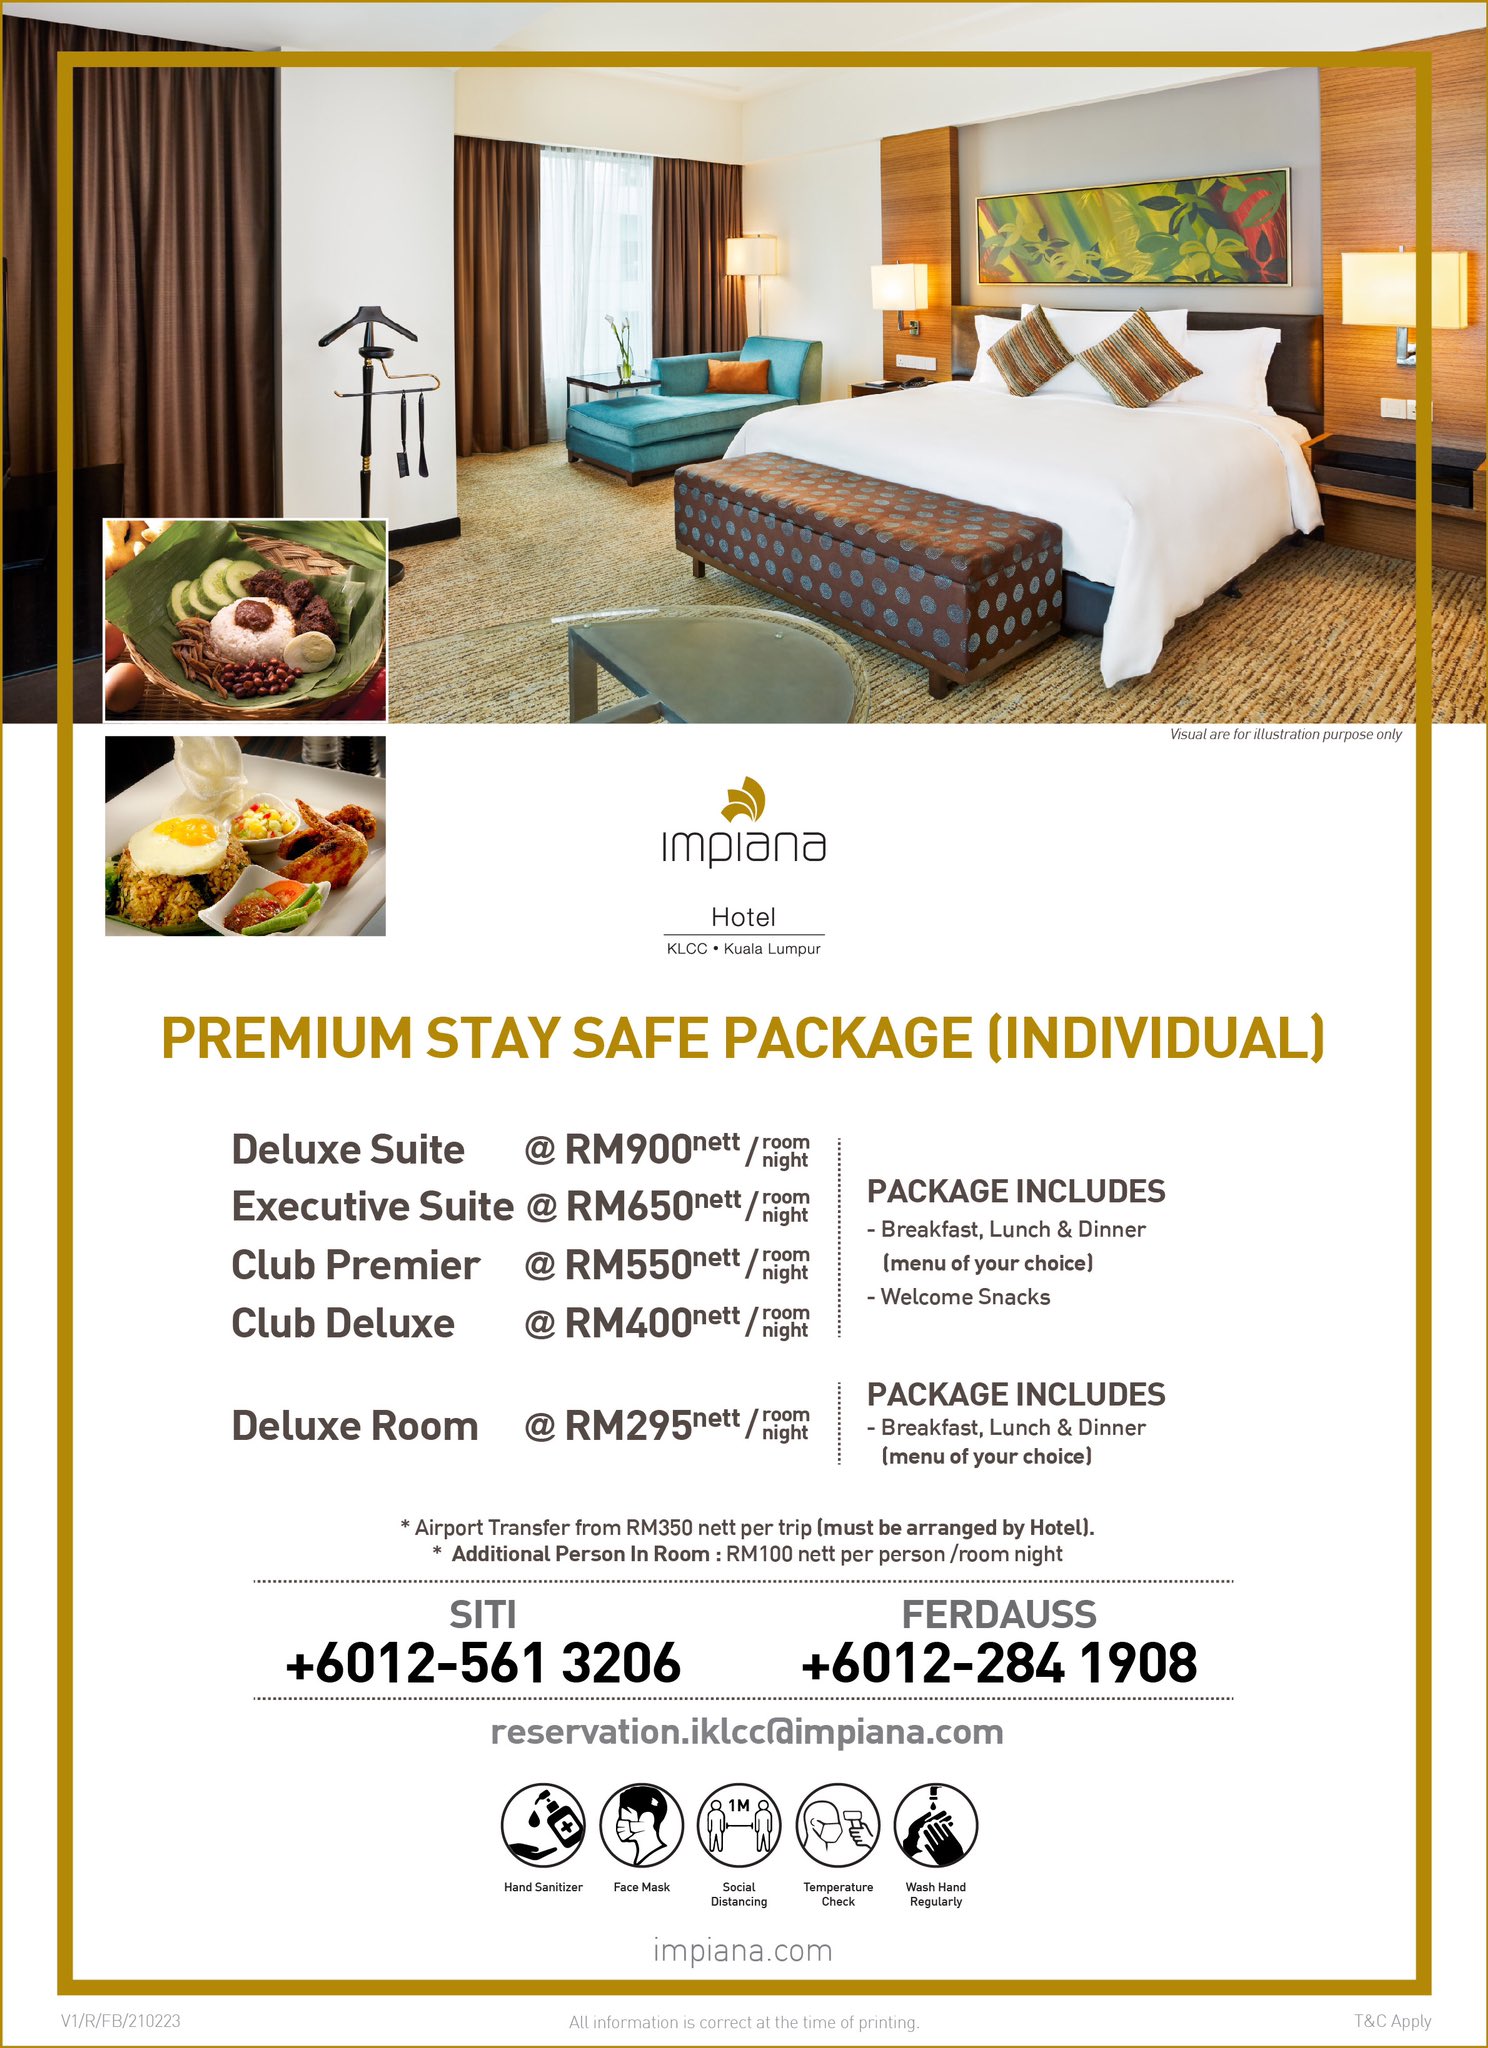 Impiana Klcc Hotel Our Premium Stay Safe Packages Are Perfect For Individuals And Families Package Includes Breakfast Lunch Dinner To Find Out More About Our Safety Packages Call Or Whatsapp